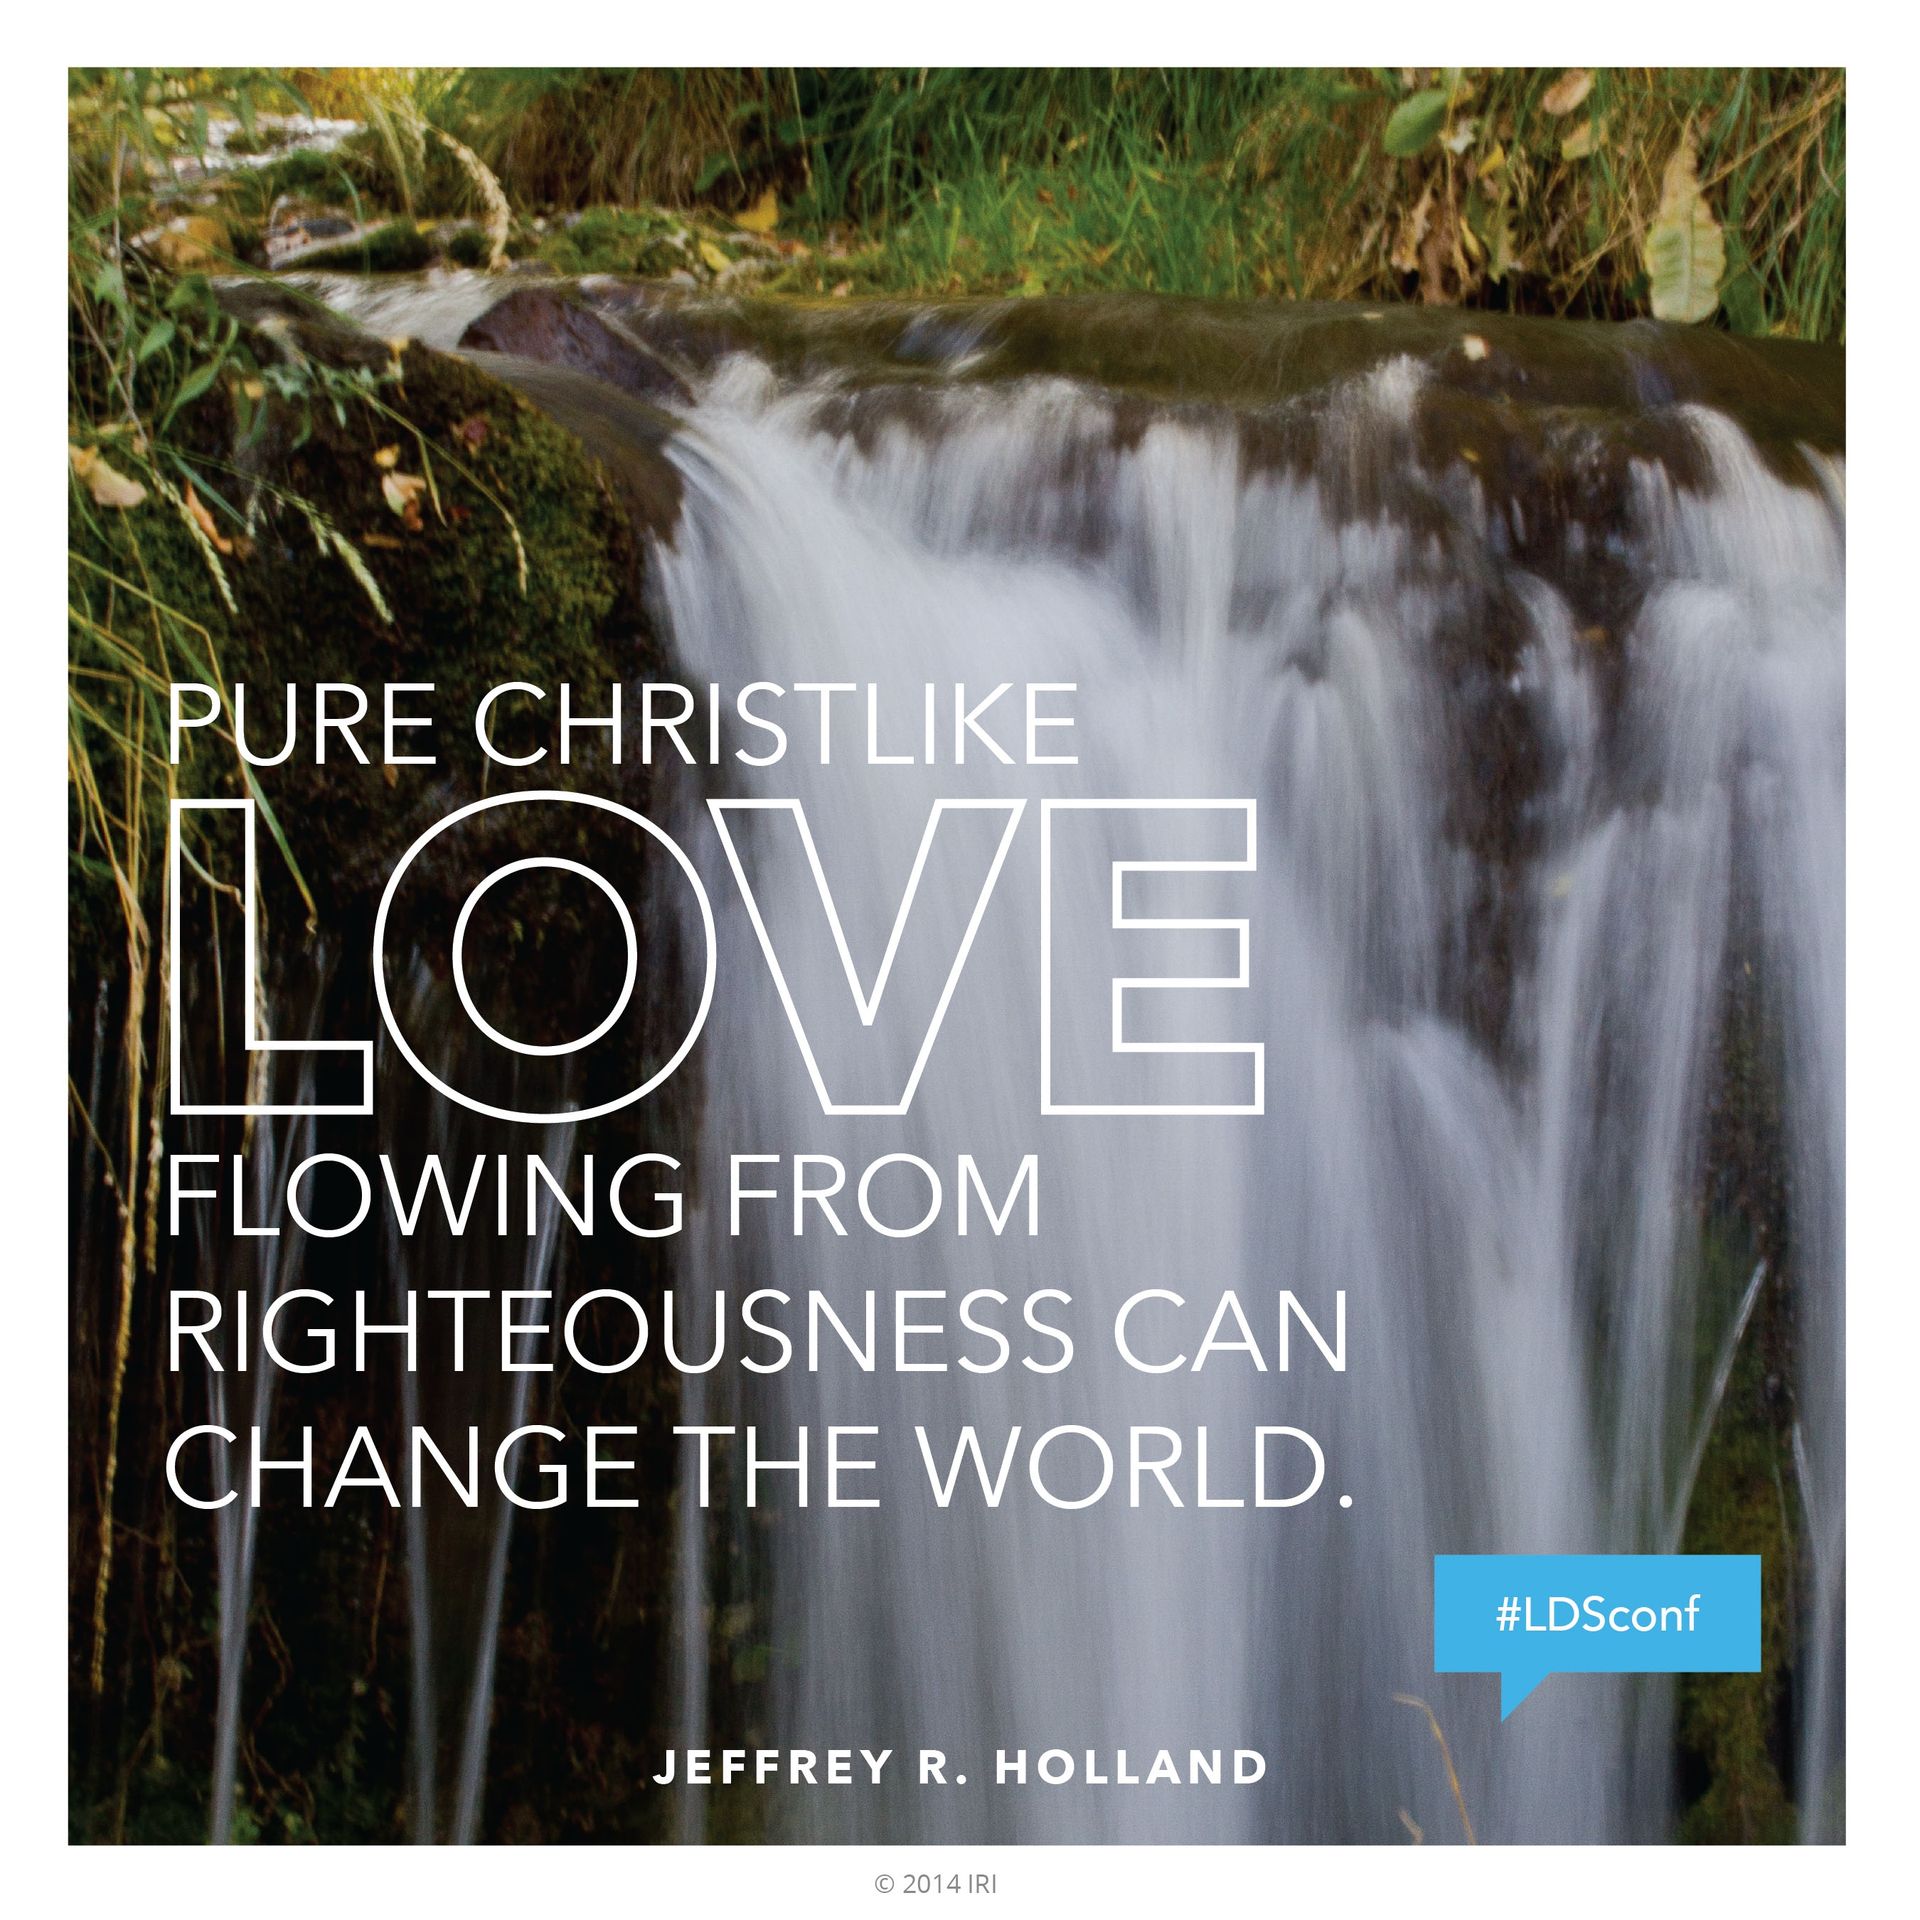 “Pure Christlike love flowing from righteousness can change the world.”—Elder Jeffrey R. Holland, “The Cost—and Blessings—of Discipleship” © undefined ipCode 1.